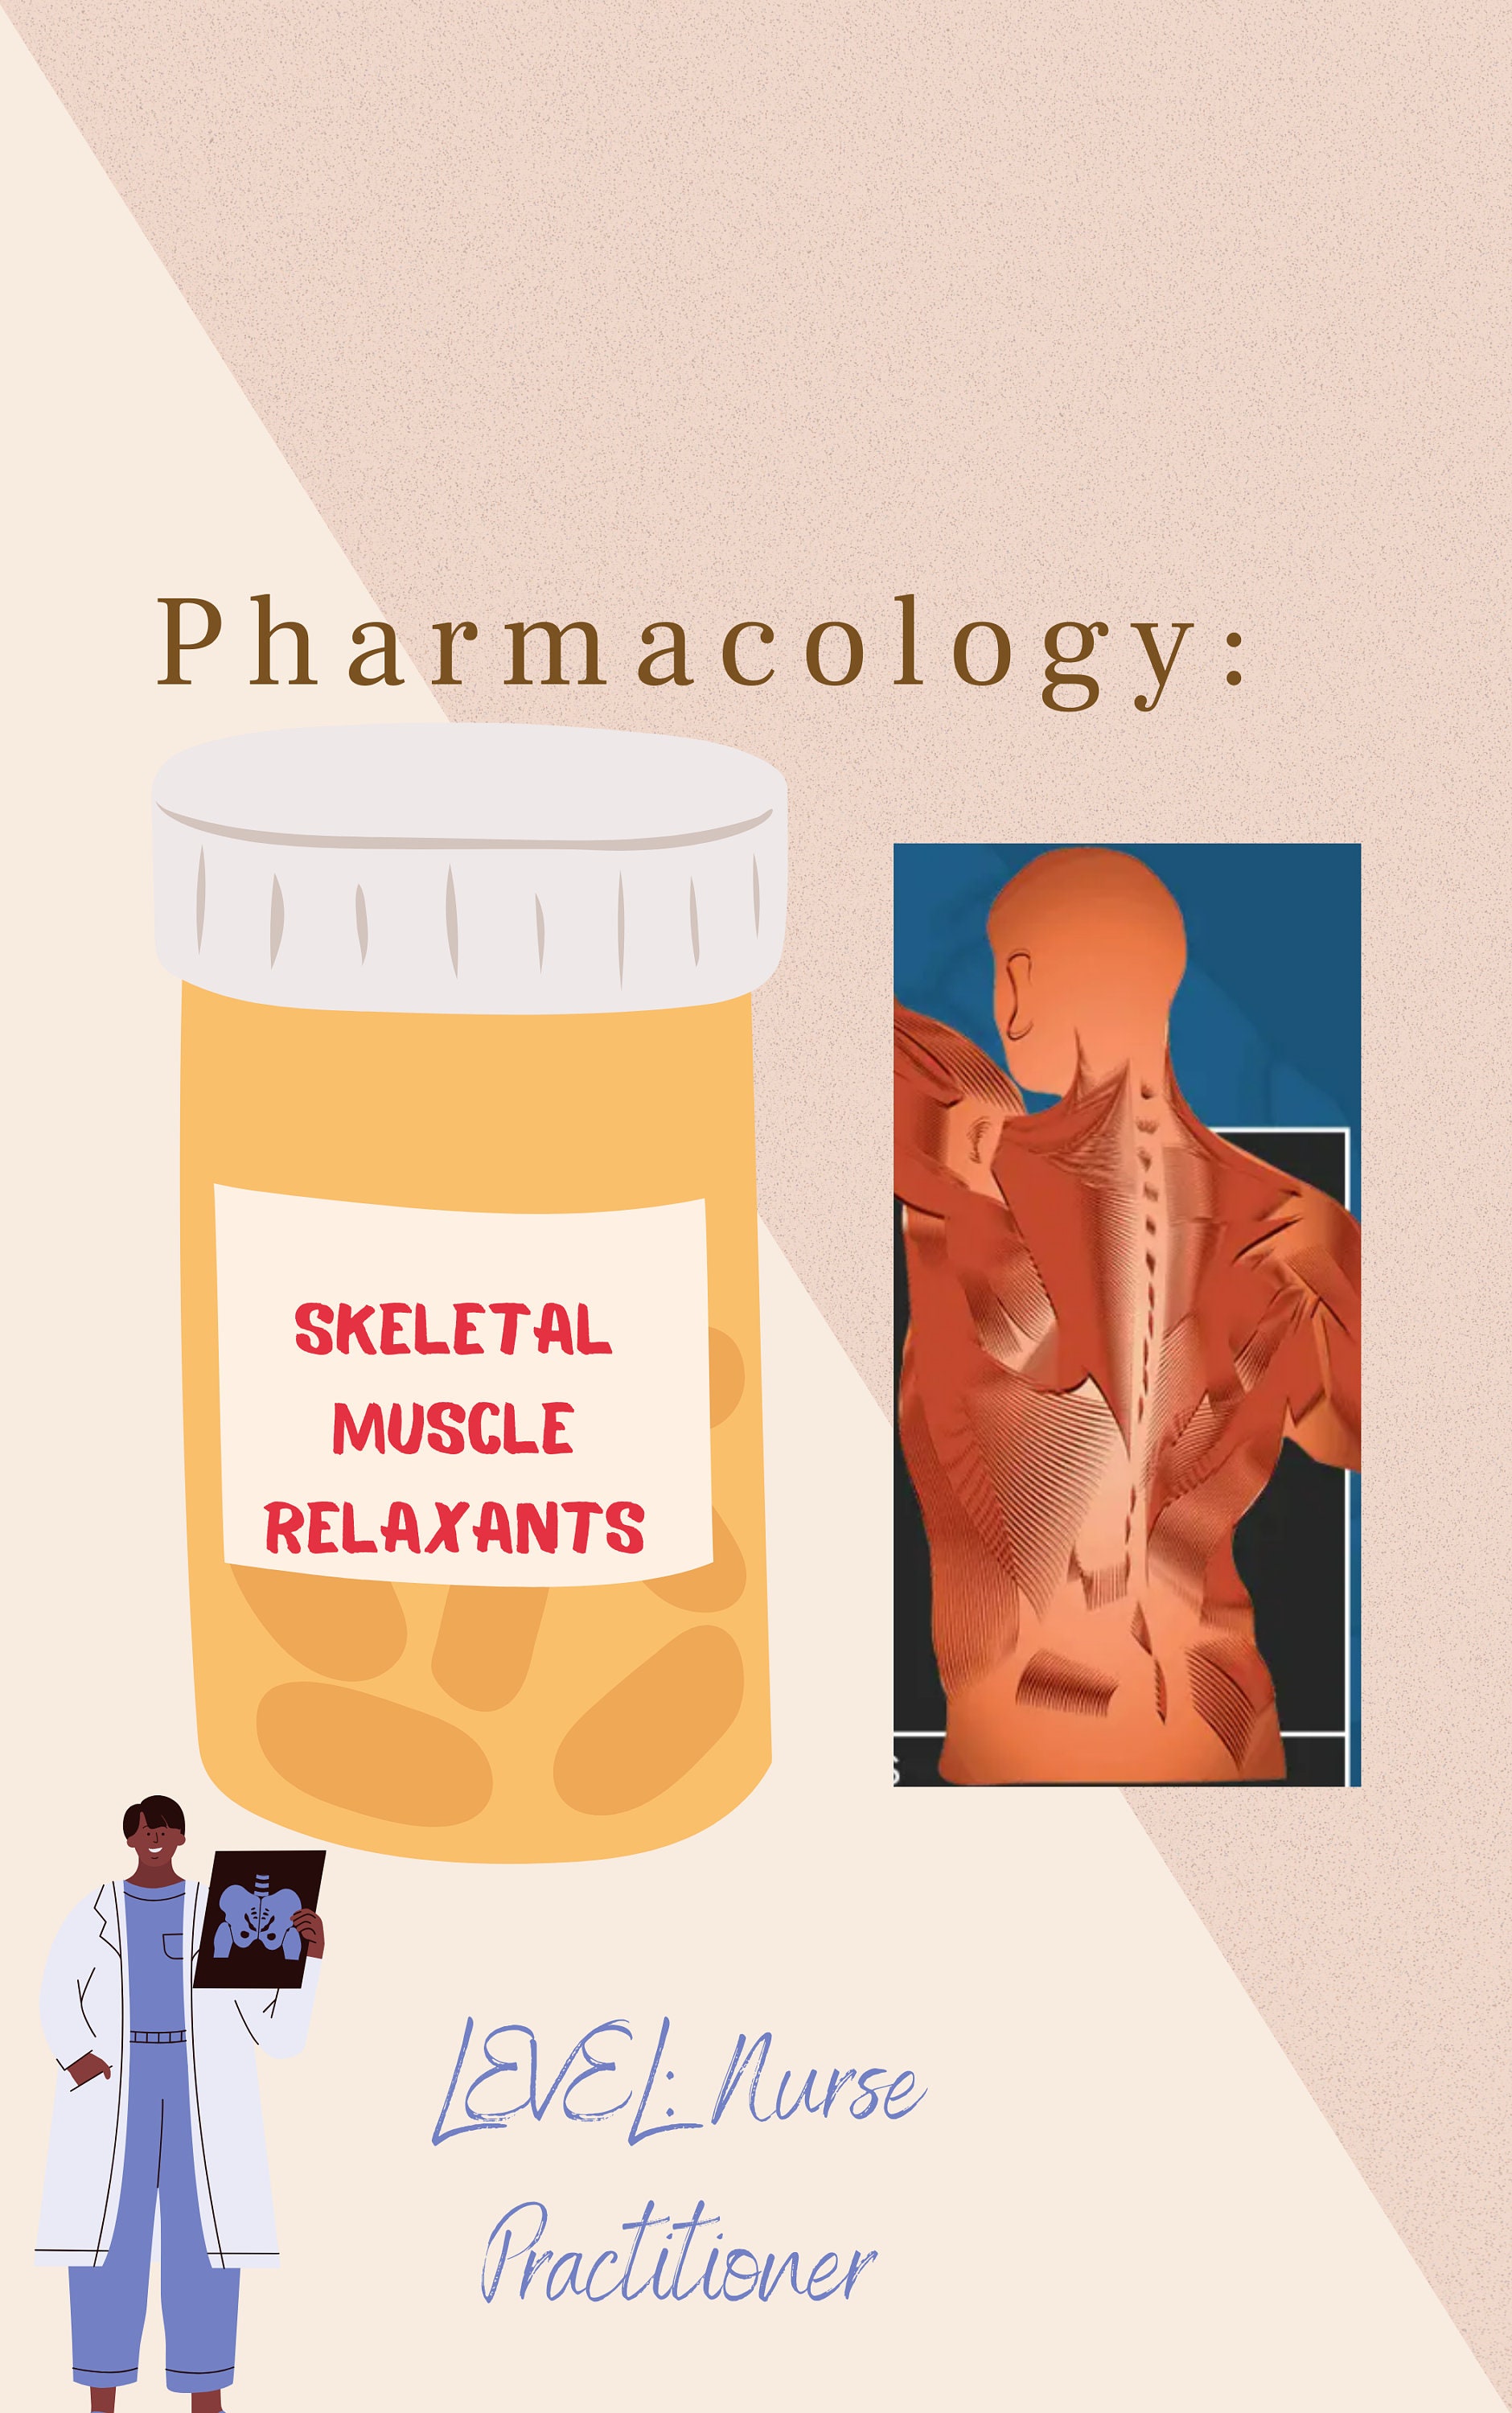 Skeletal muscle relaxants: Nursing pharmacology - Osmosis Video Library